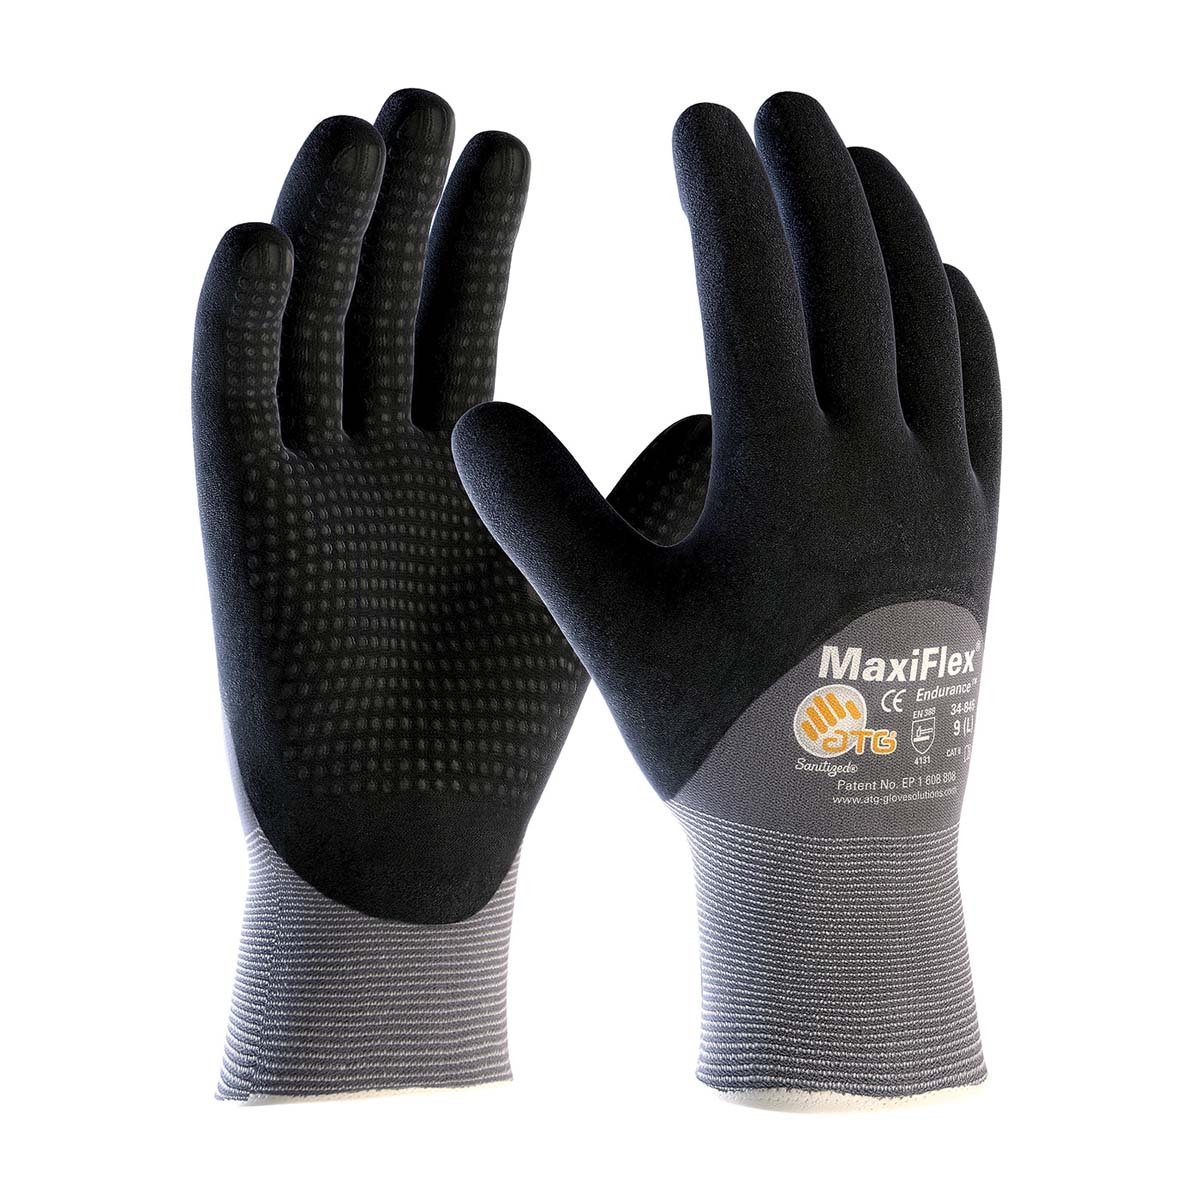 PIP® 2X MaxiFlex® Endurance by ATG® Nitrile Work Gloves With Nylon Liner And Knit Wrist